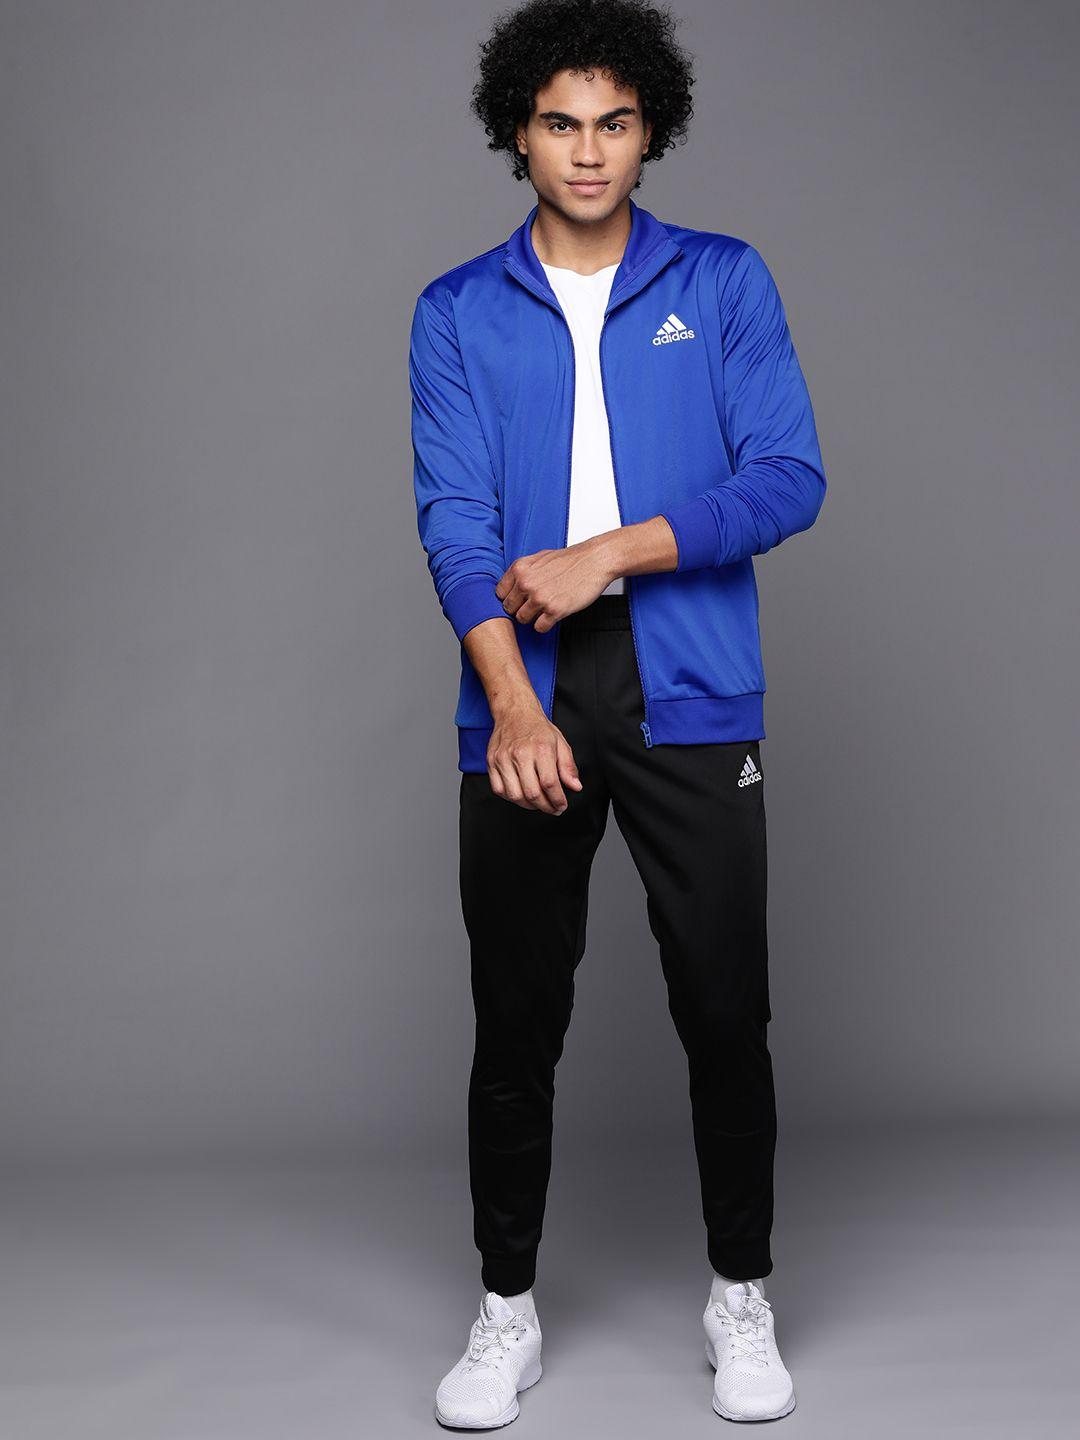 adidas-men-blue-&-black-solid-sustainable-track-suit